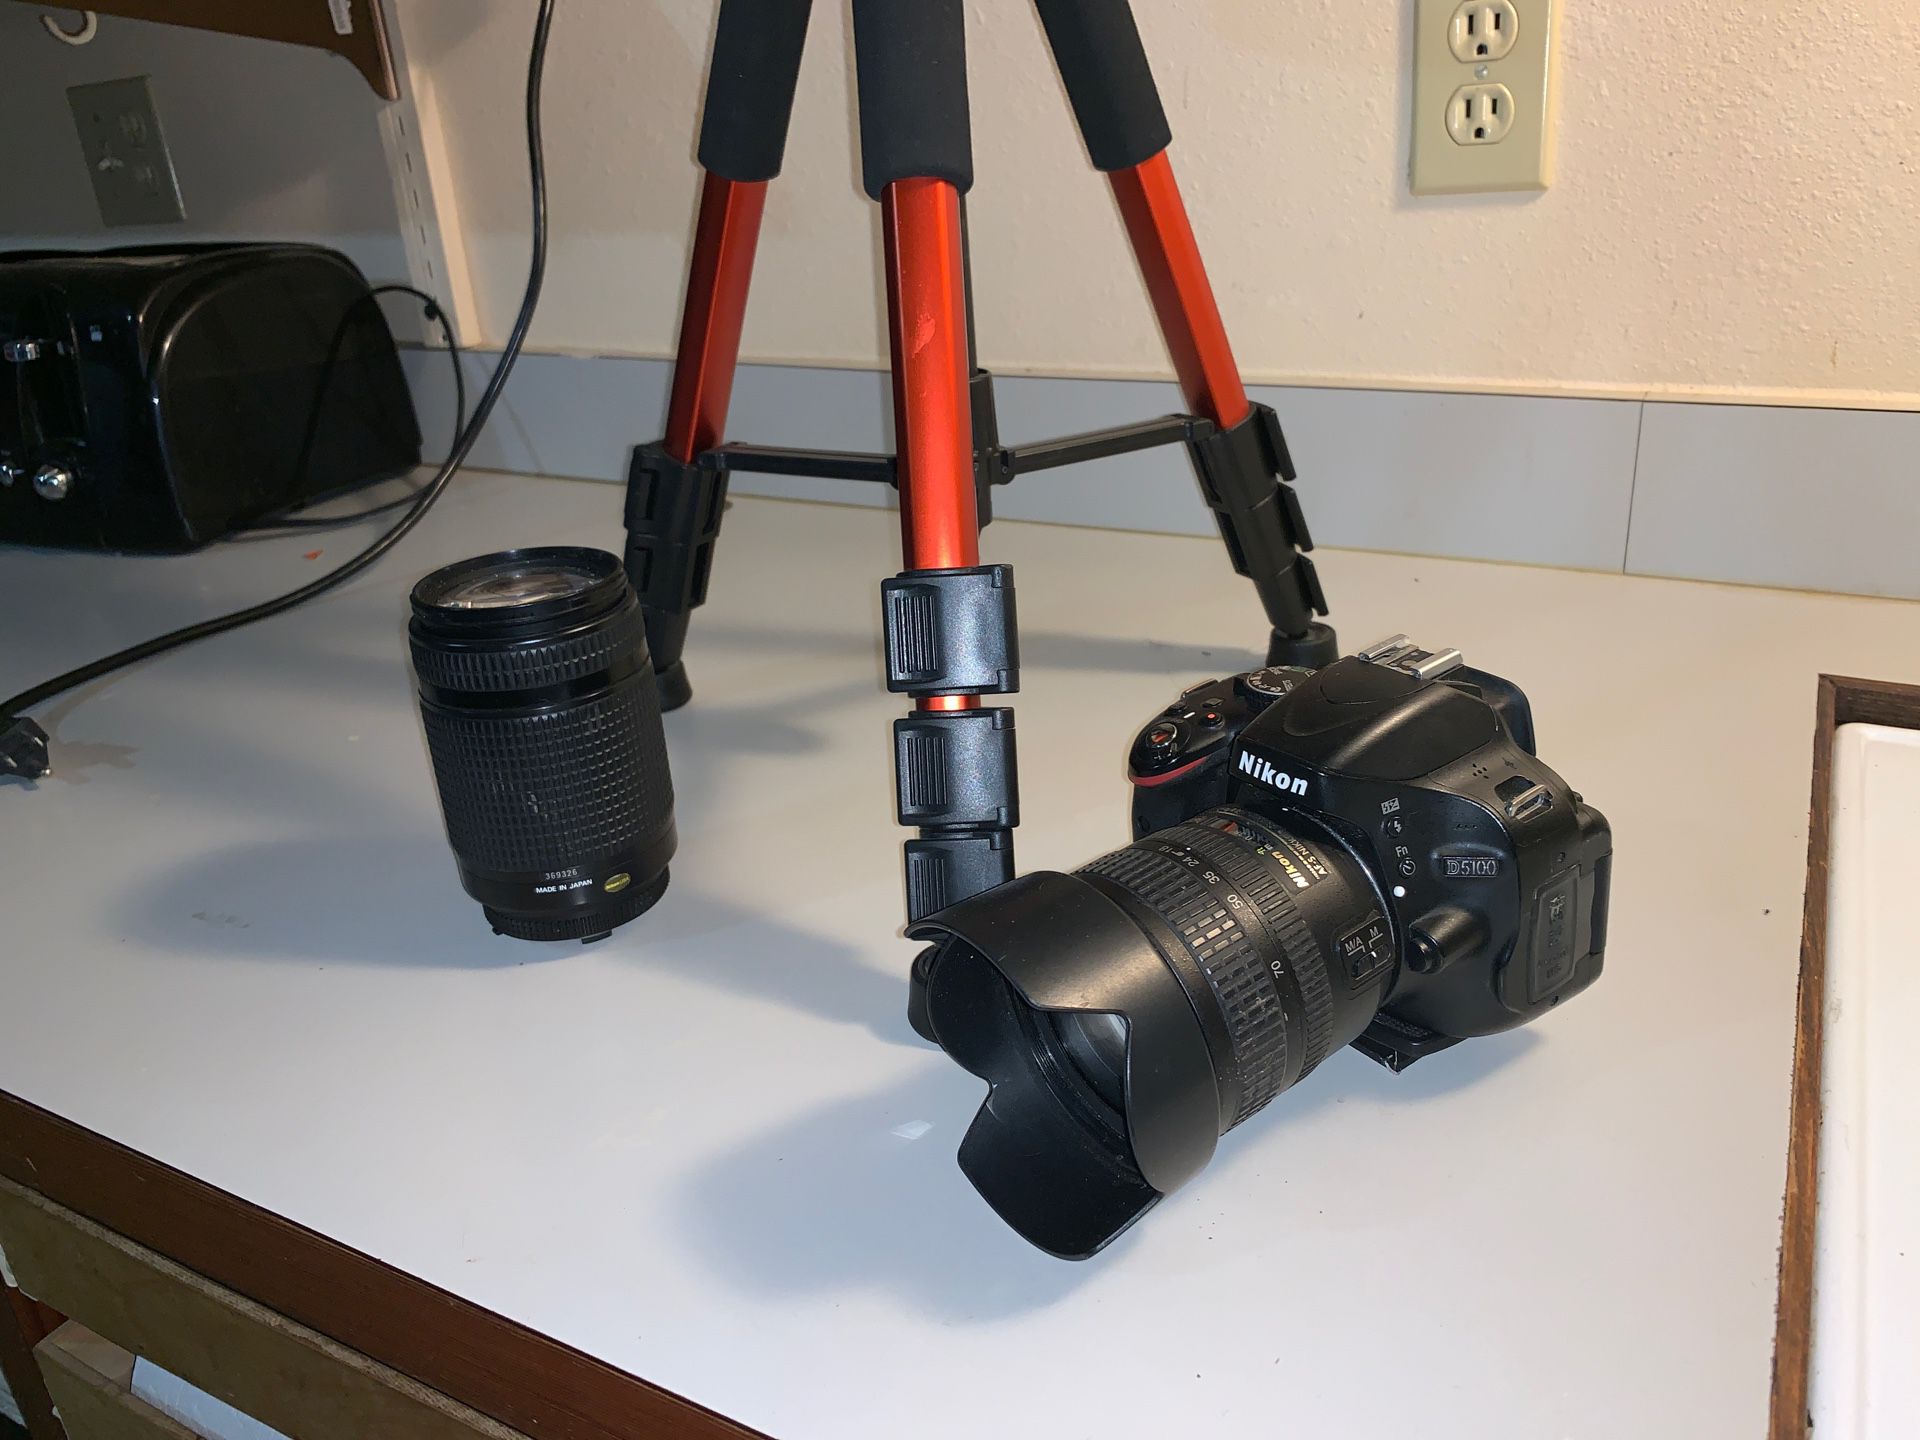 Nikon D5100 35mm and 300mm lenses with tripod.